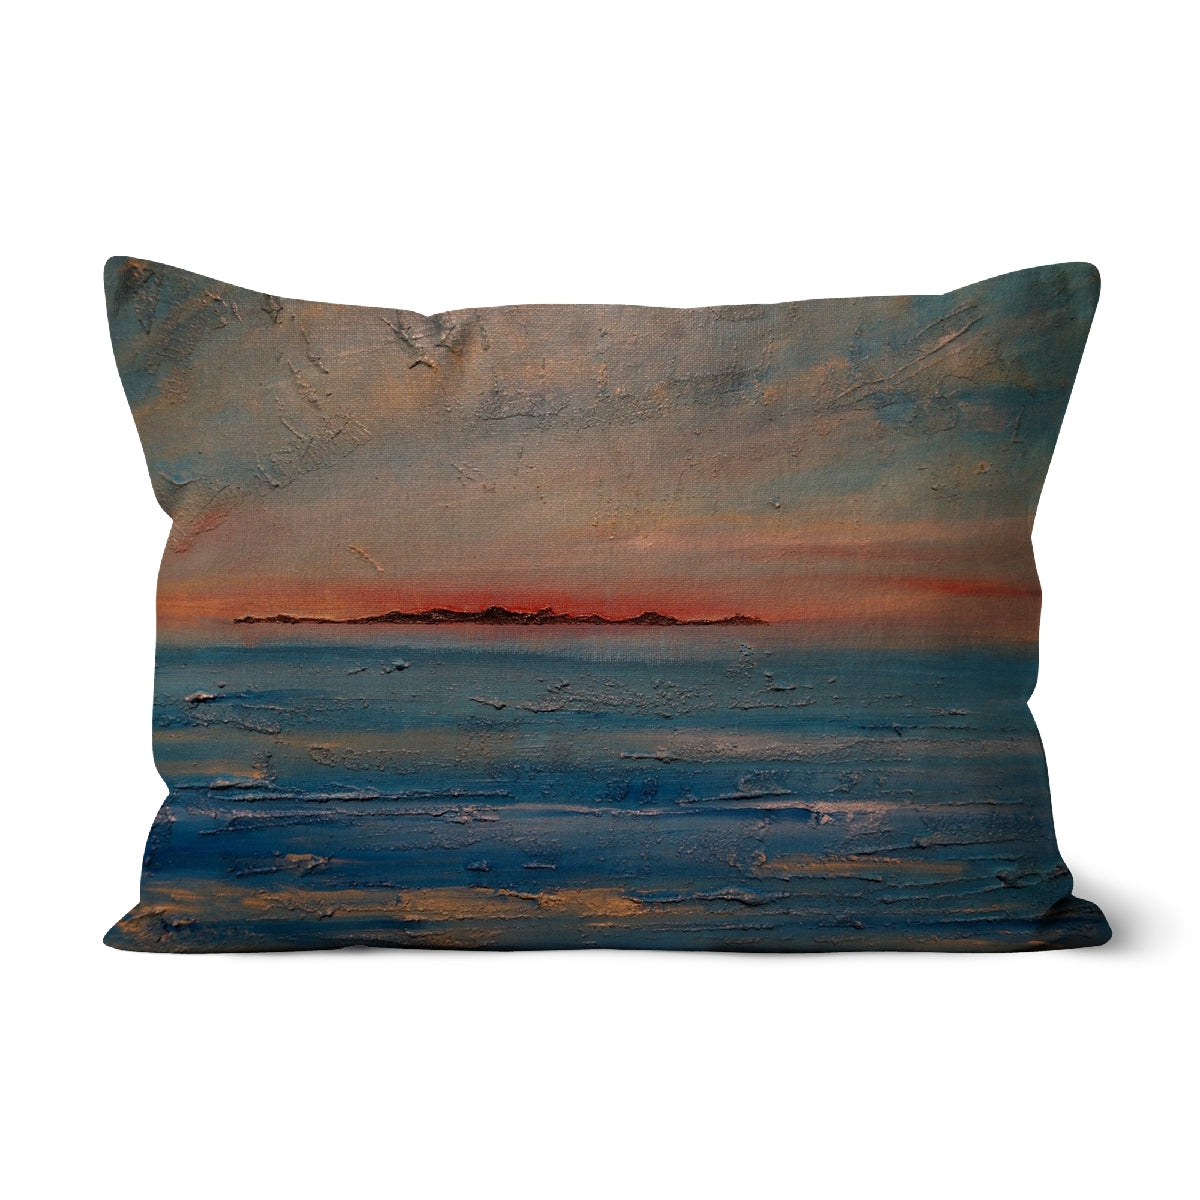 Gigha Sunset Art Gifts Cushion-Cushions-Hebridean Islands Art Gallery-Canvas-19"x13"-Paintings, Prints, Homeware, Art Gifts From Scotland By Scottish Artist Kevin Hunter